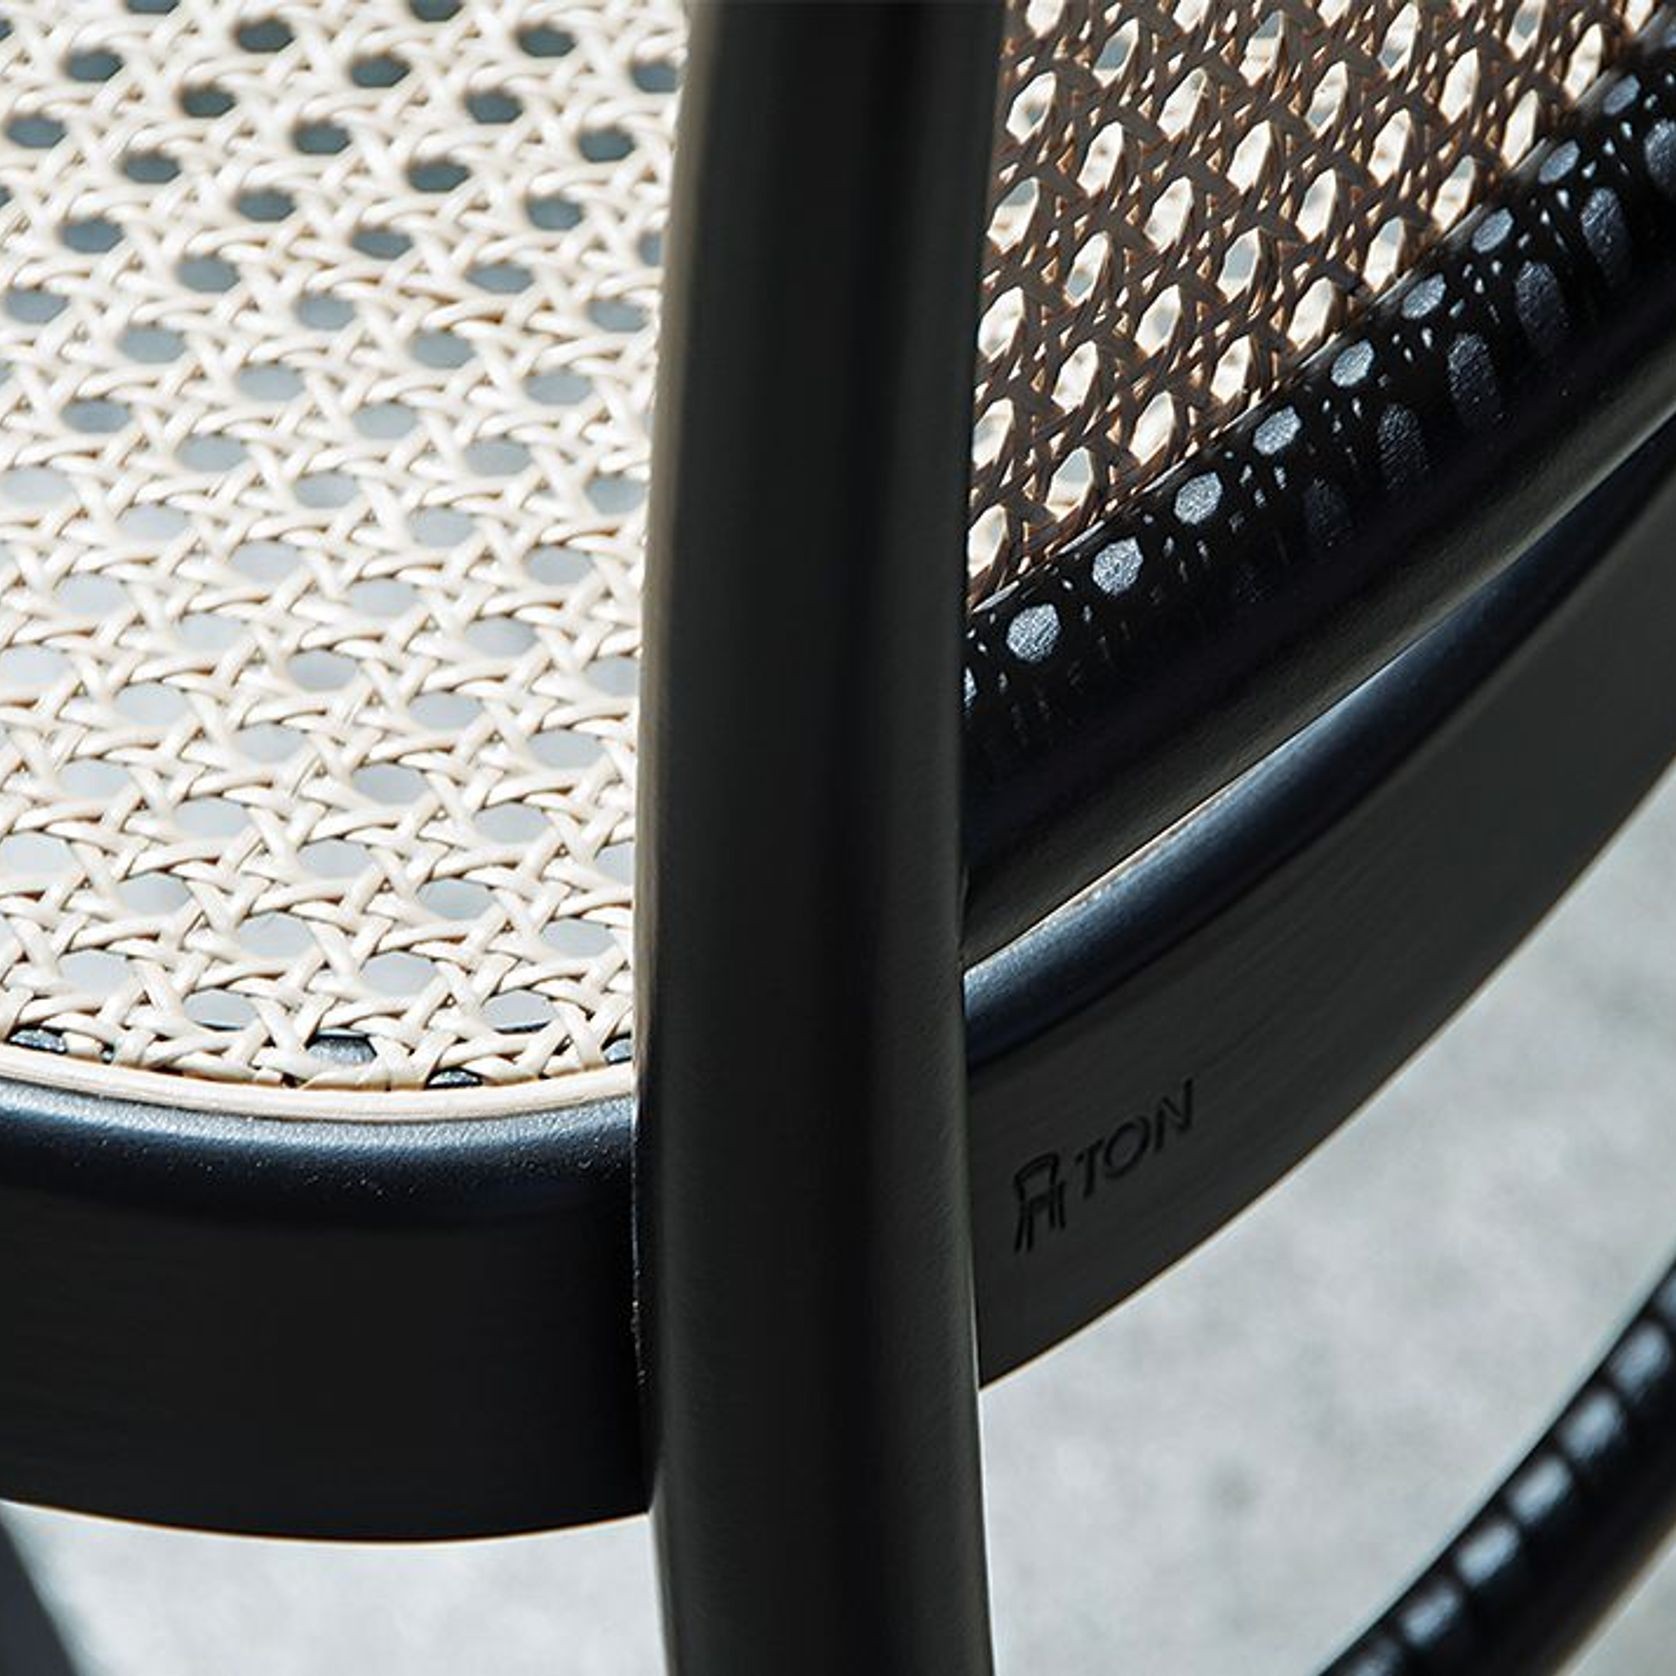 811 Hoffmann Chair - Black Stain - by TON gallery detail image